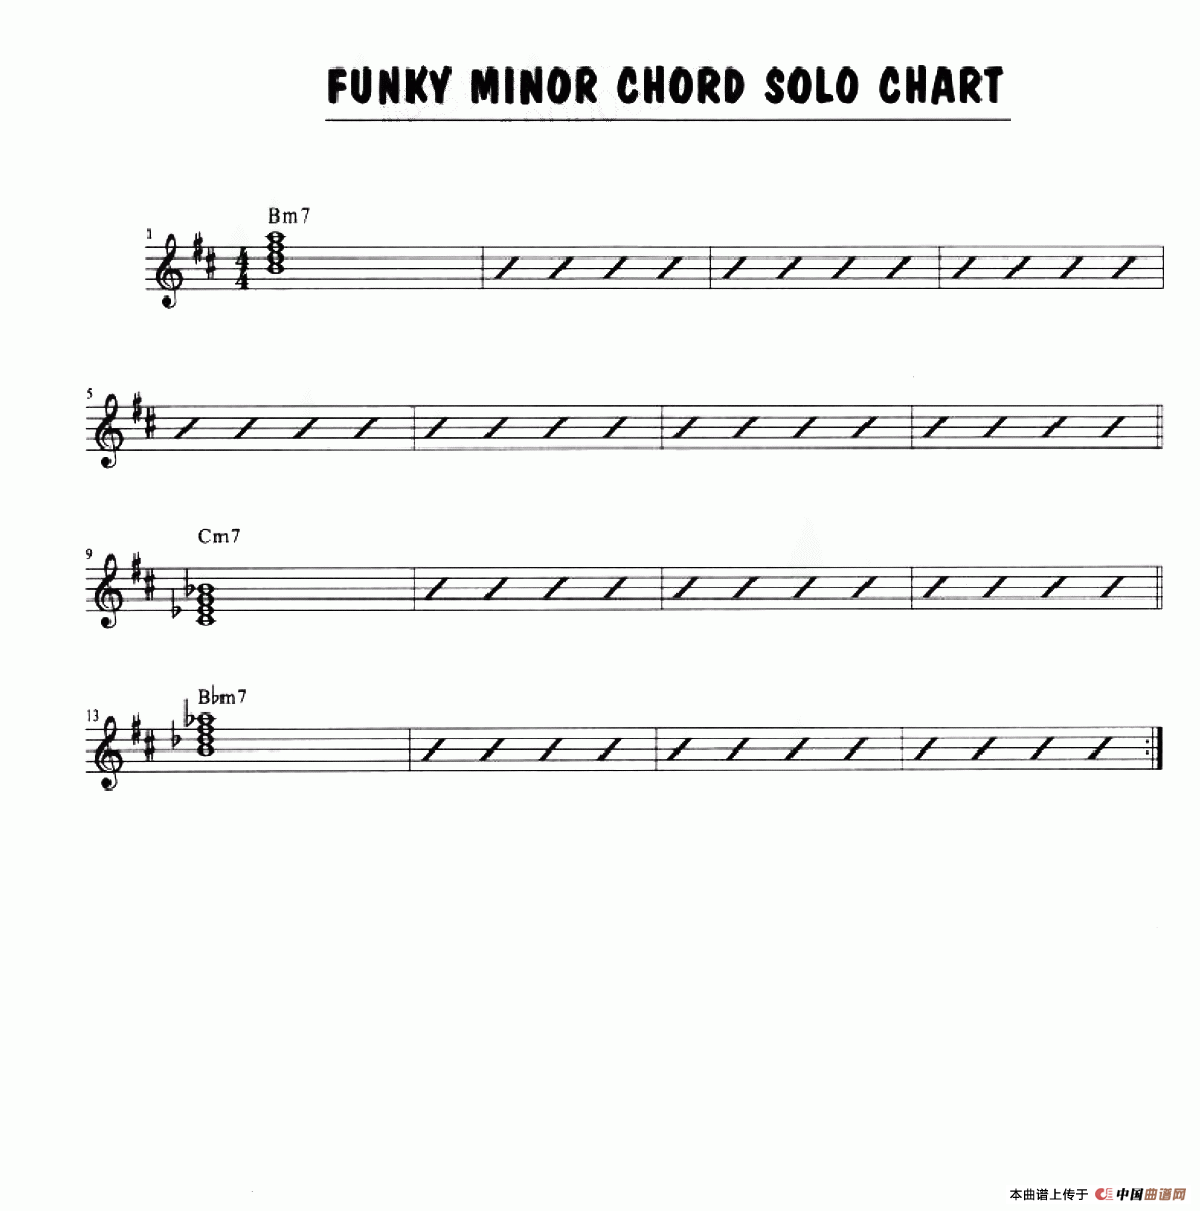 Funky Minor Chord Solo Chart